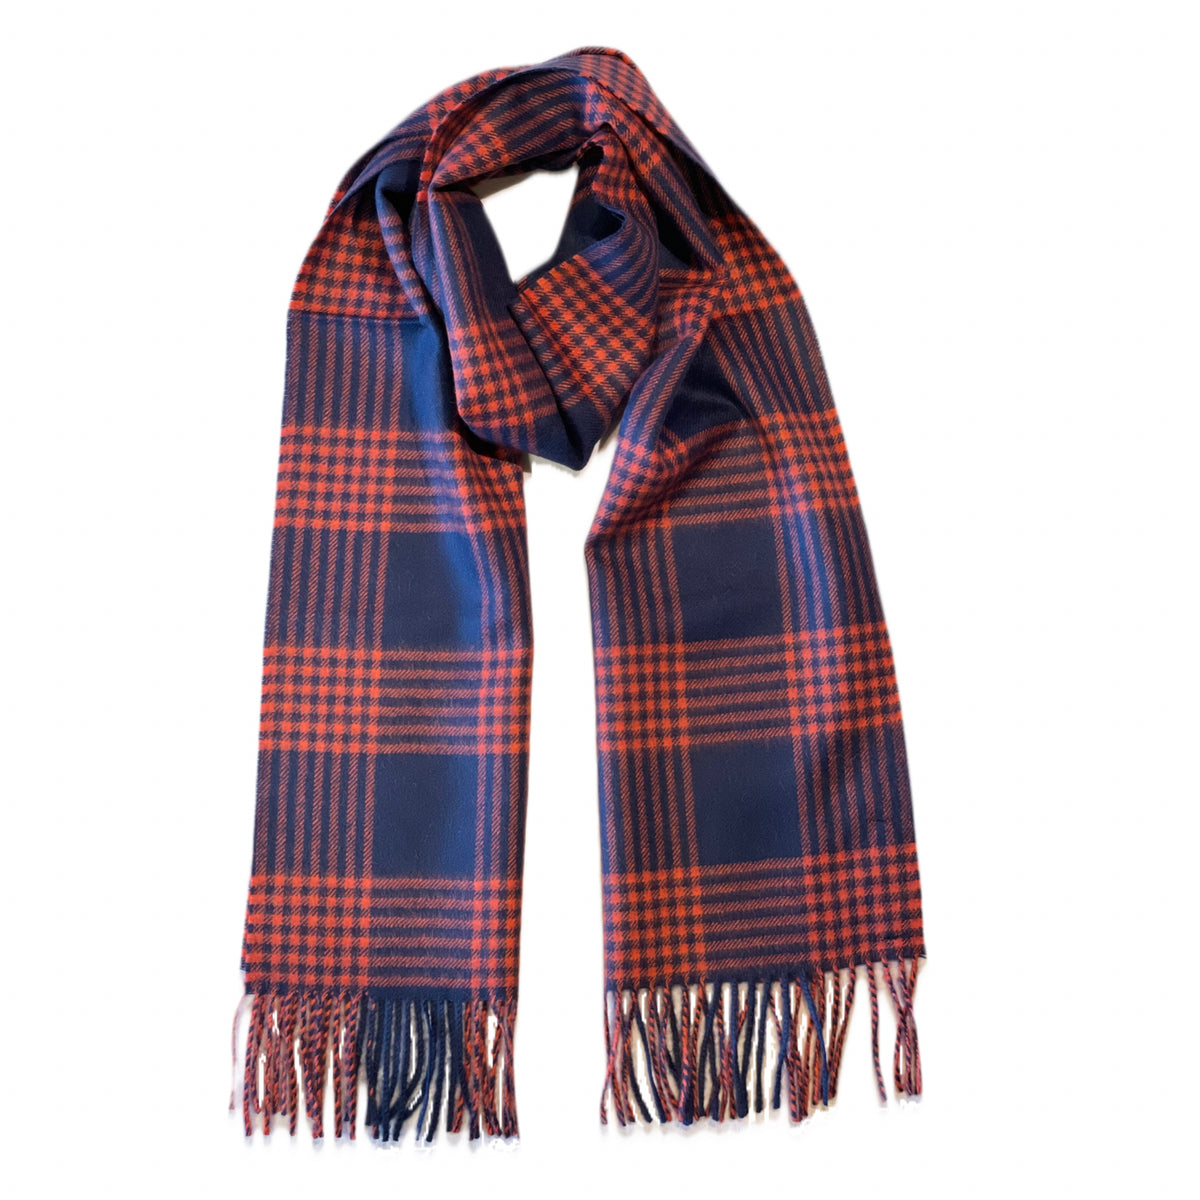 Red and navy plaid wool winter scarf with fringe